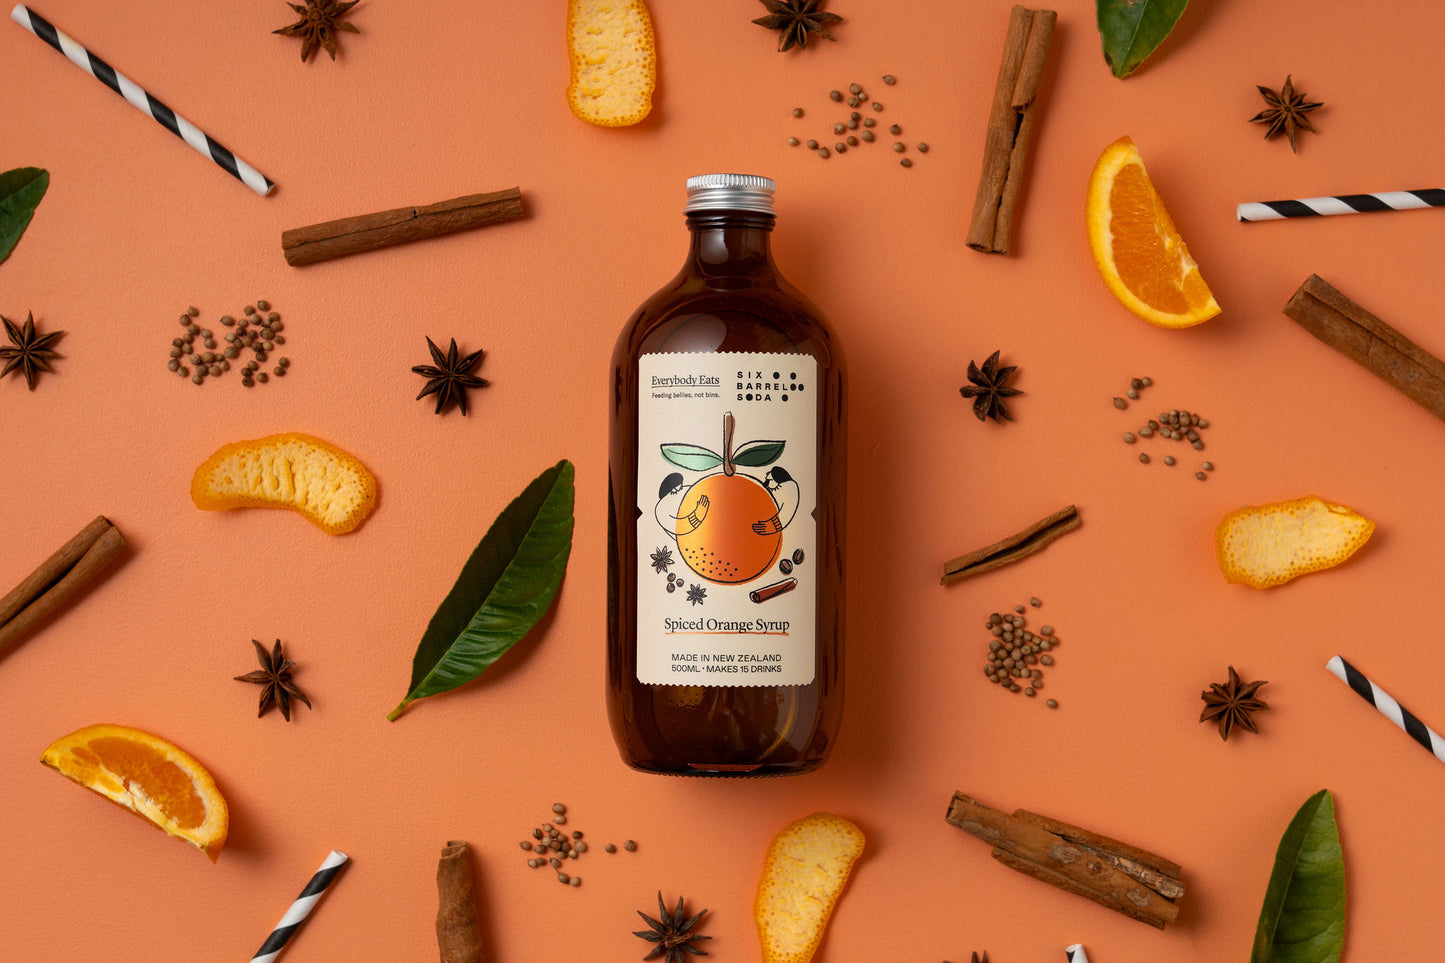 Introducing Spiced Orange Syrup - Everybody Eats Collab